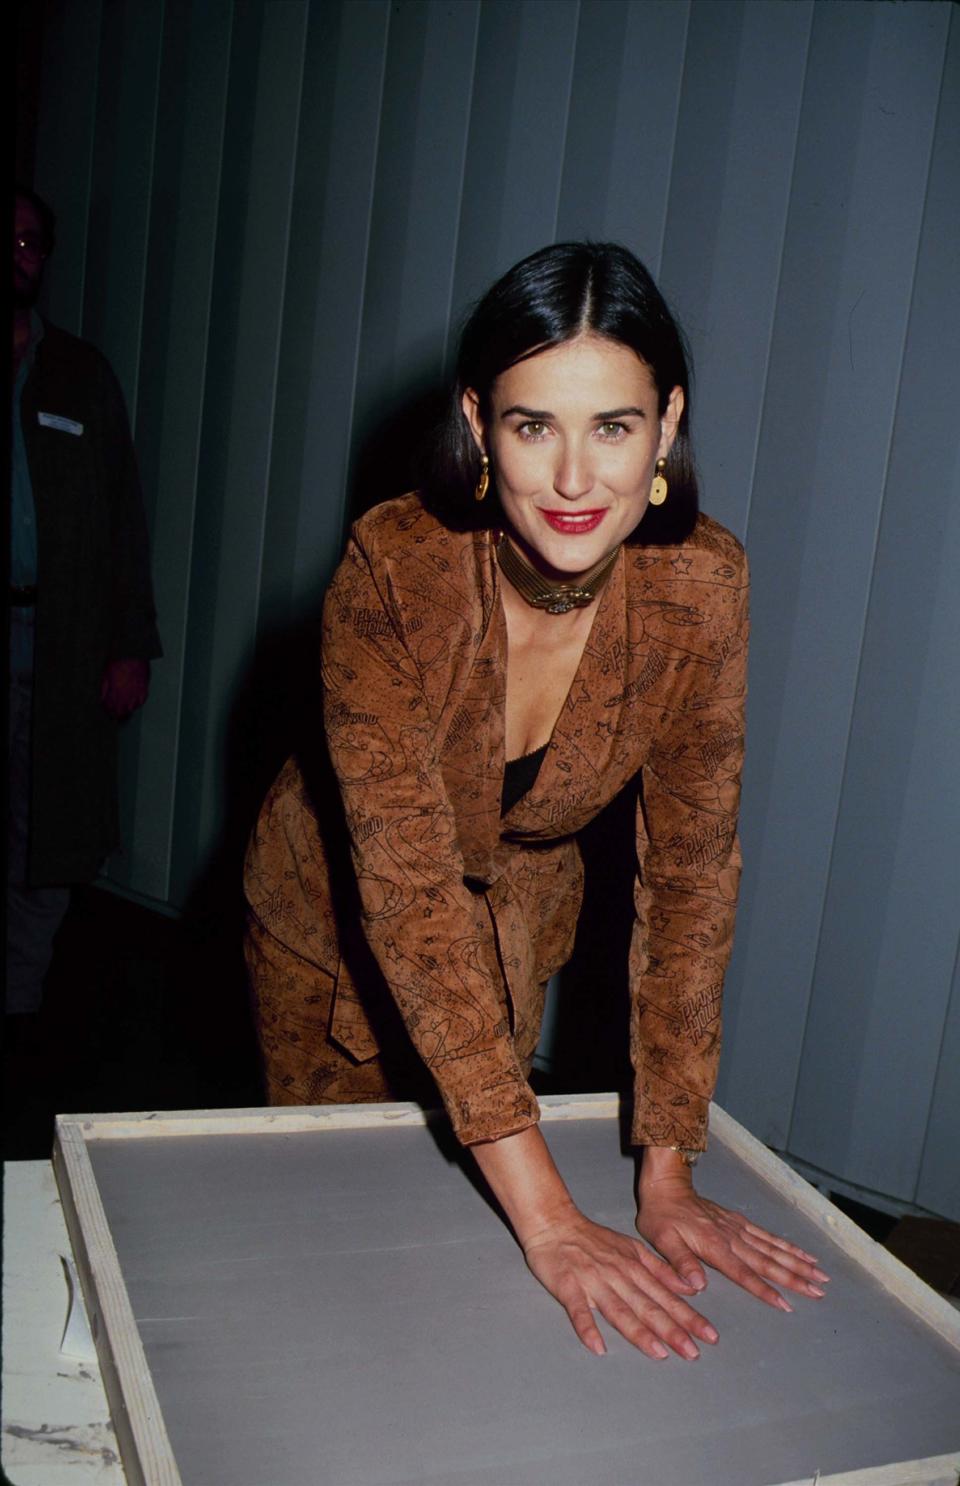 In honor of her 56th birthday, here is a look back at Demi Moore's best beauty moments, from her bowl cut to her shaved head.